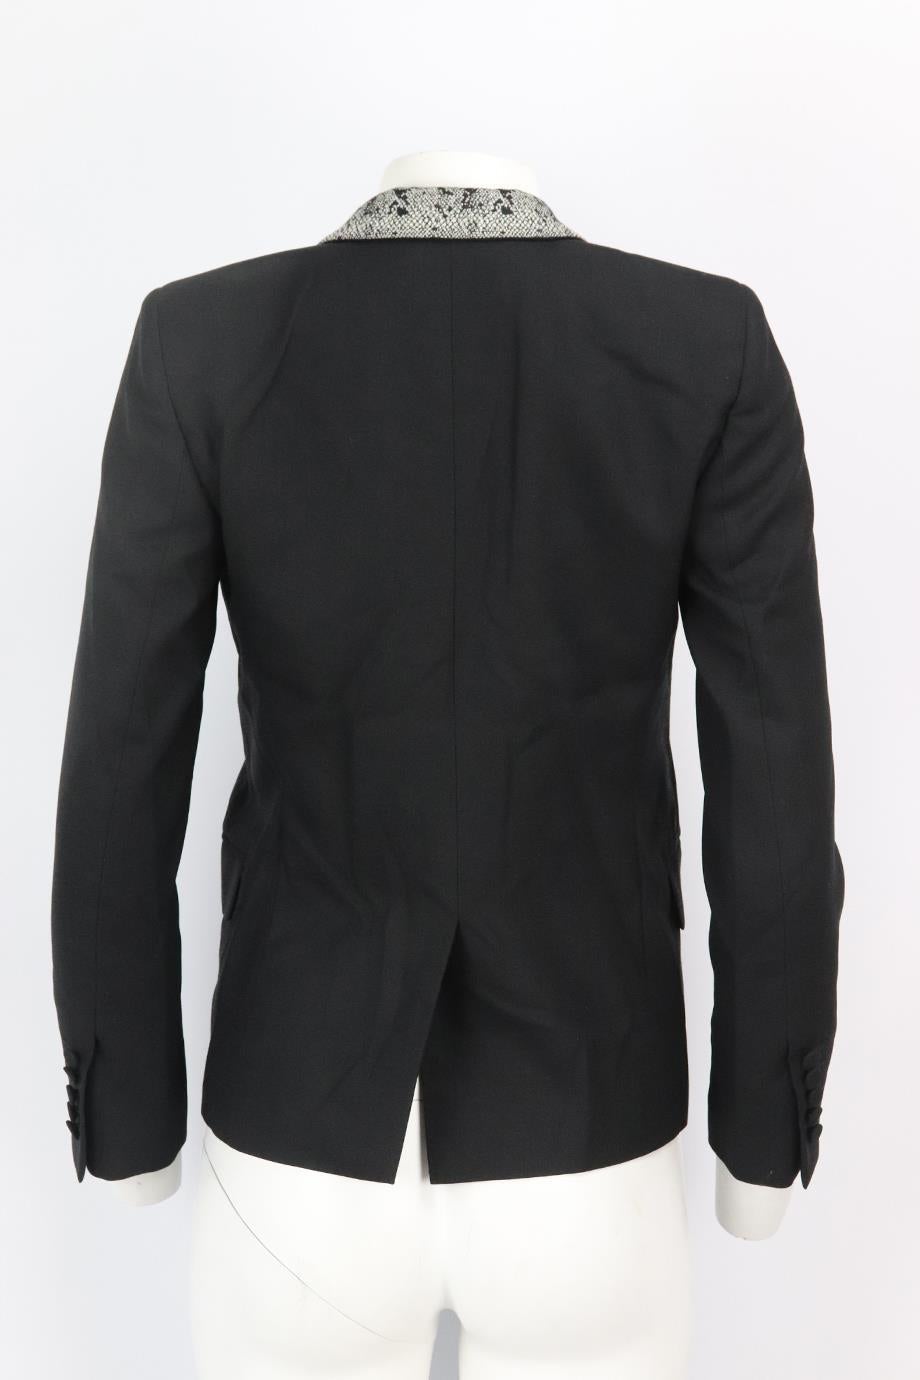 Saint Laurent Snake Jacquard Trimmed Wool Blazer Fr 36 Uk 8 In Excellent Condition In London, GB